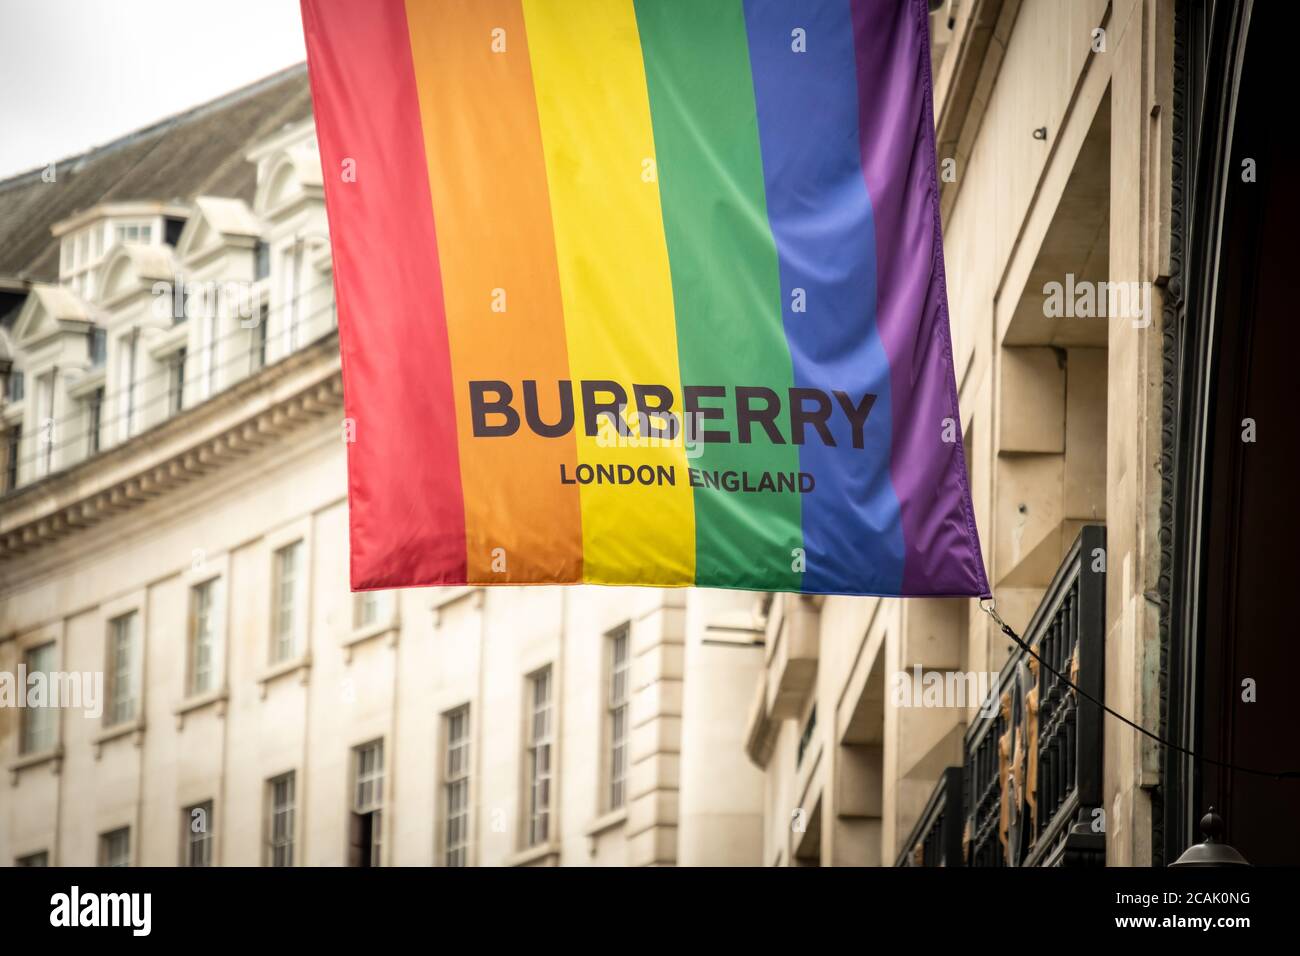 London- Burberry retail store signage on Regent Street in London's West End  Stock Photo - Alamy